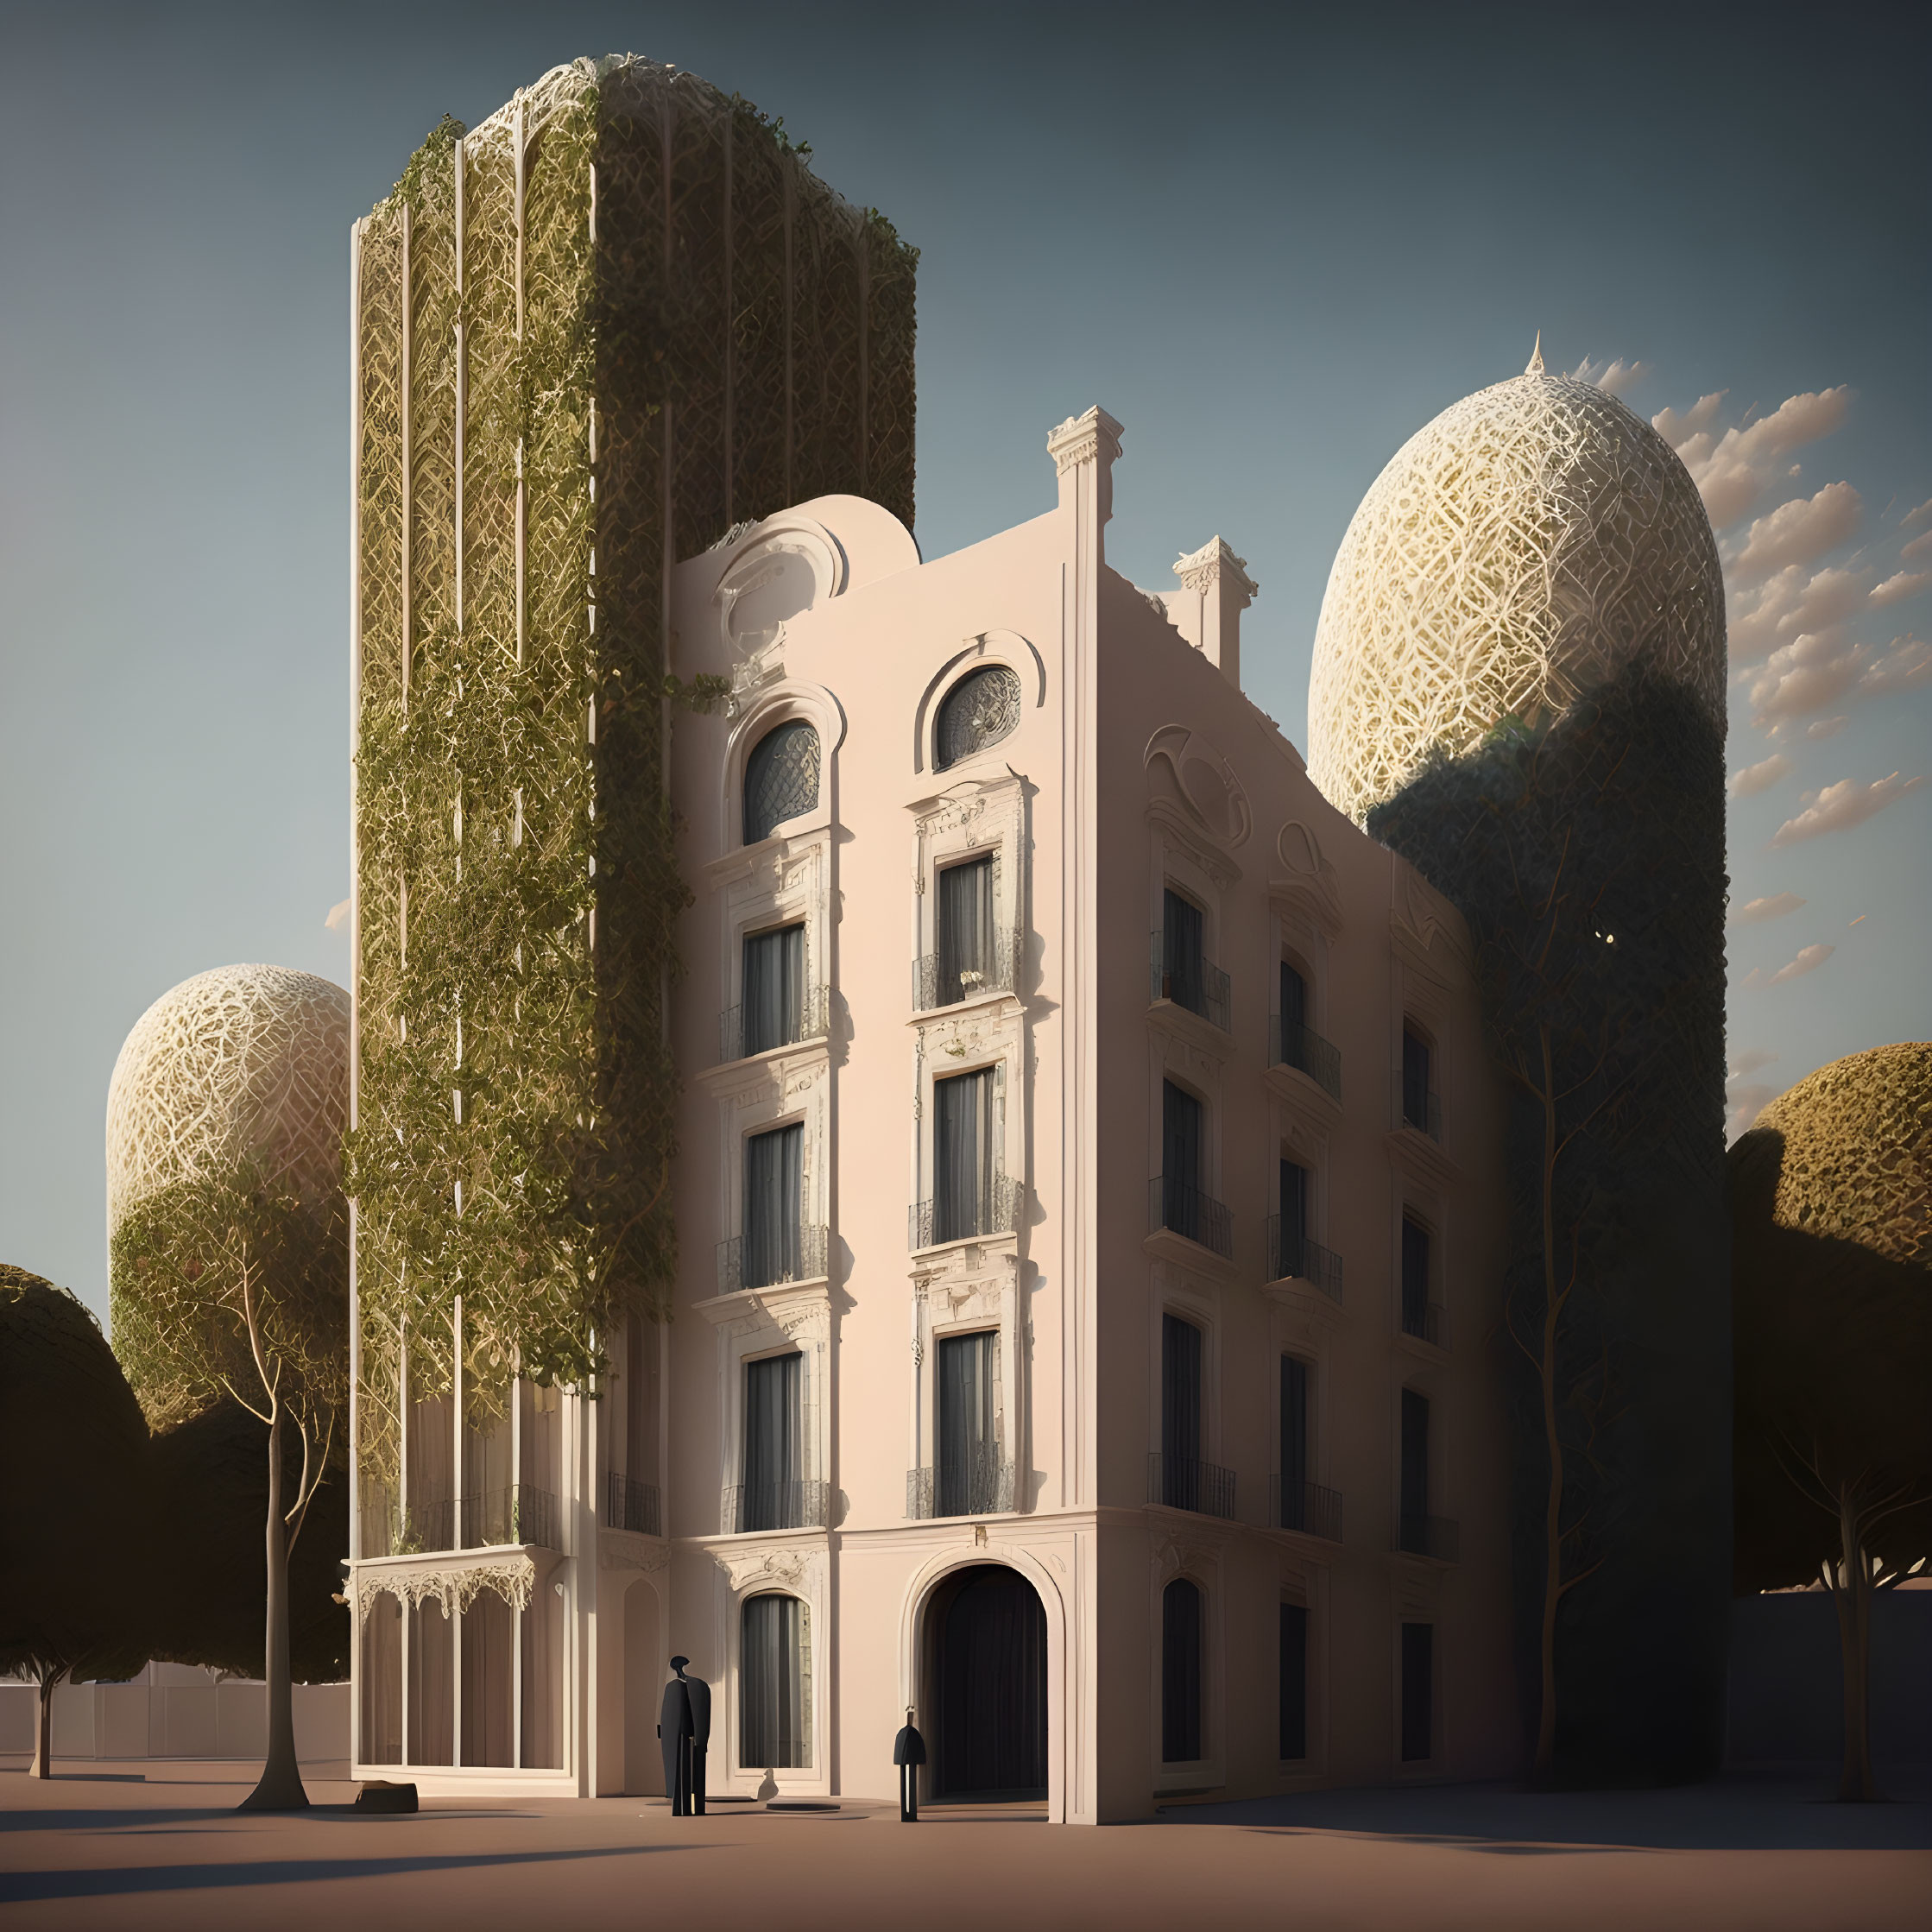 Surreal architectural rendering of classic building with modern sphere structures amidst trees and clear sky